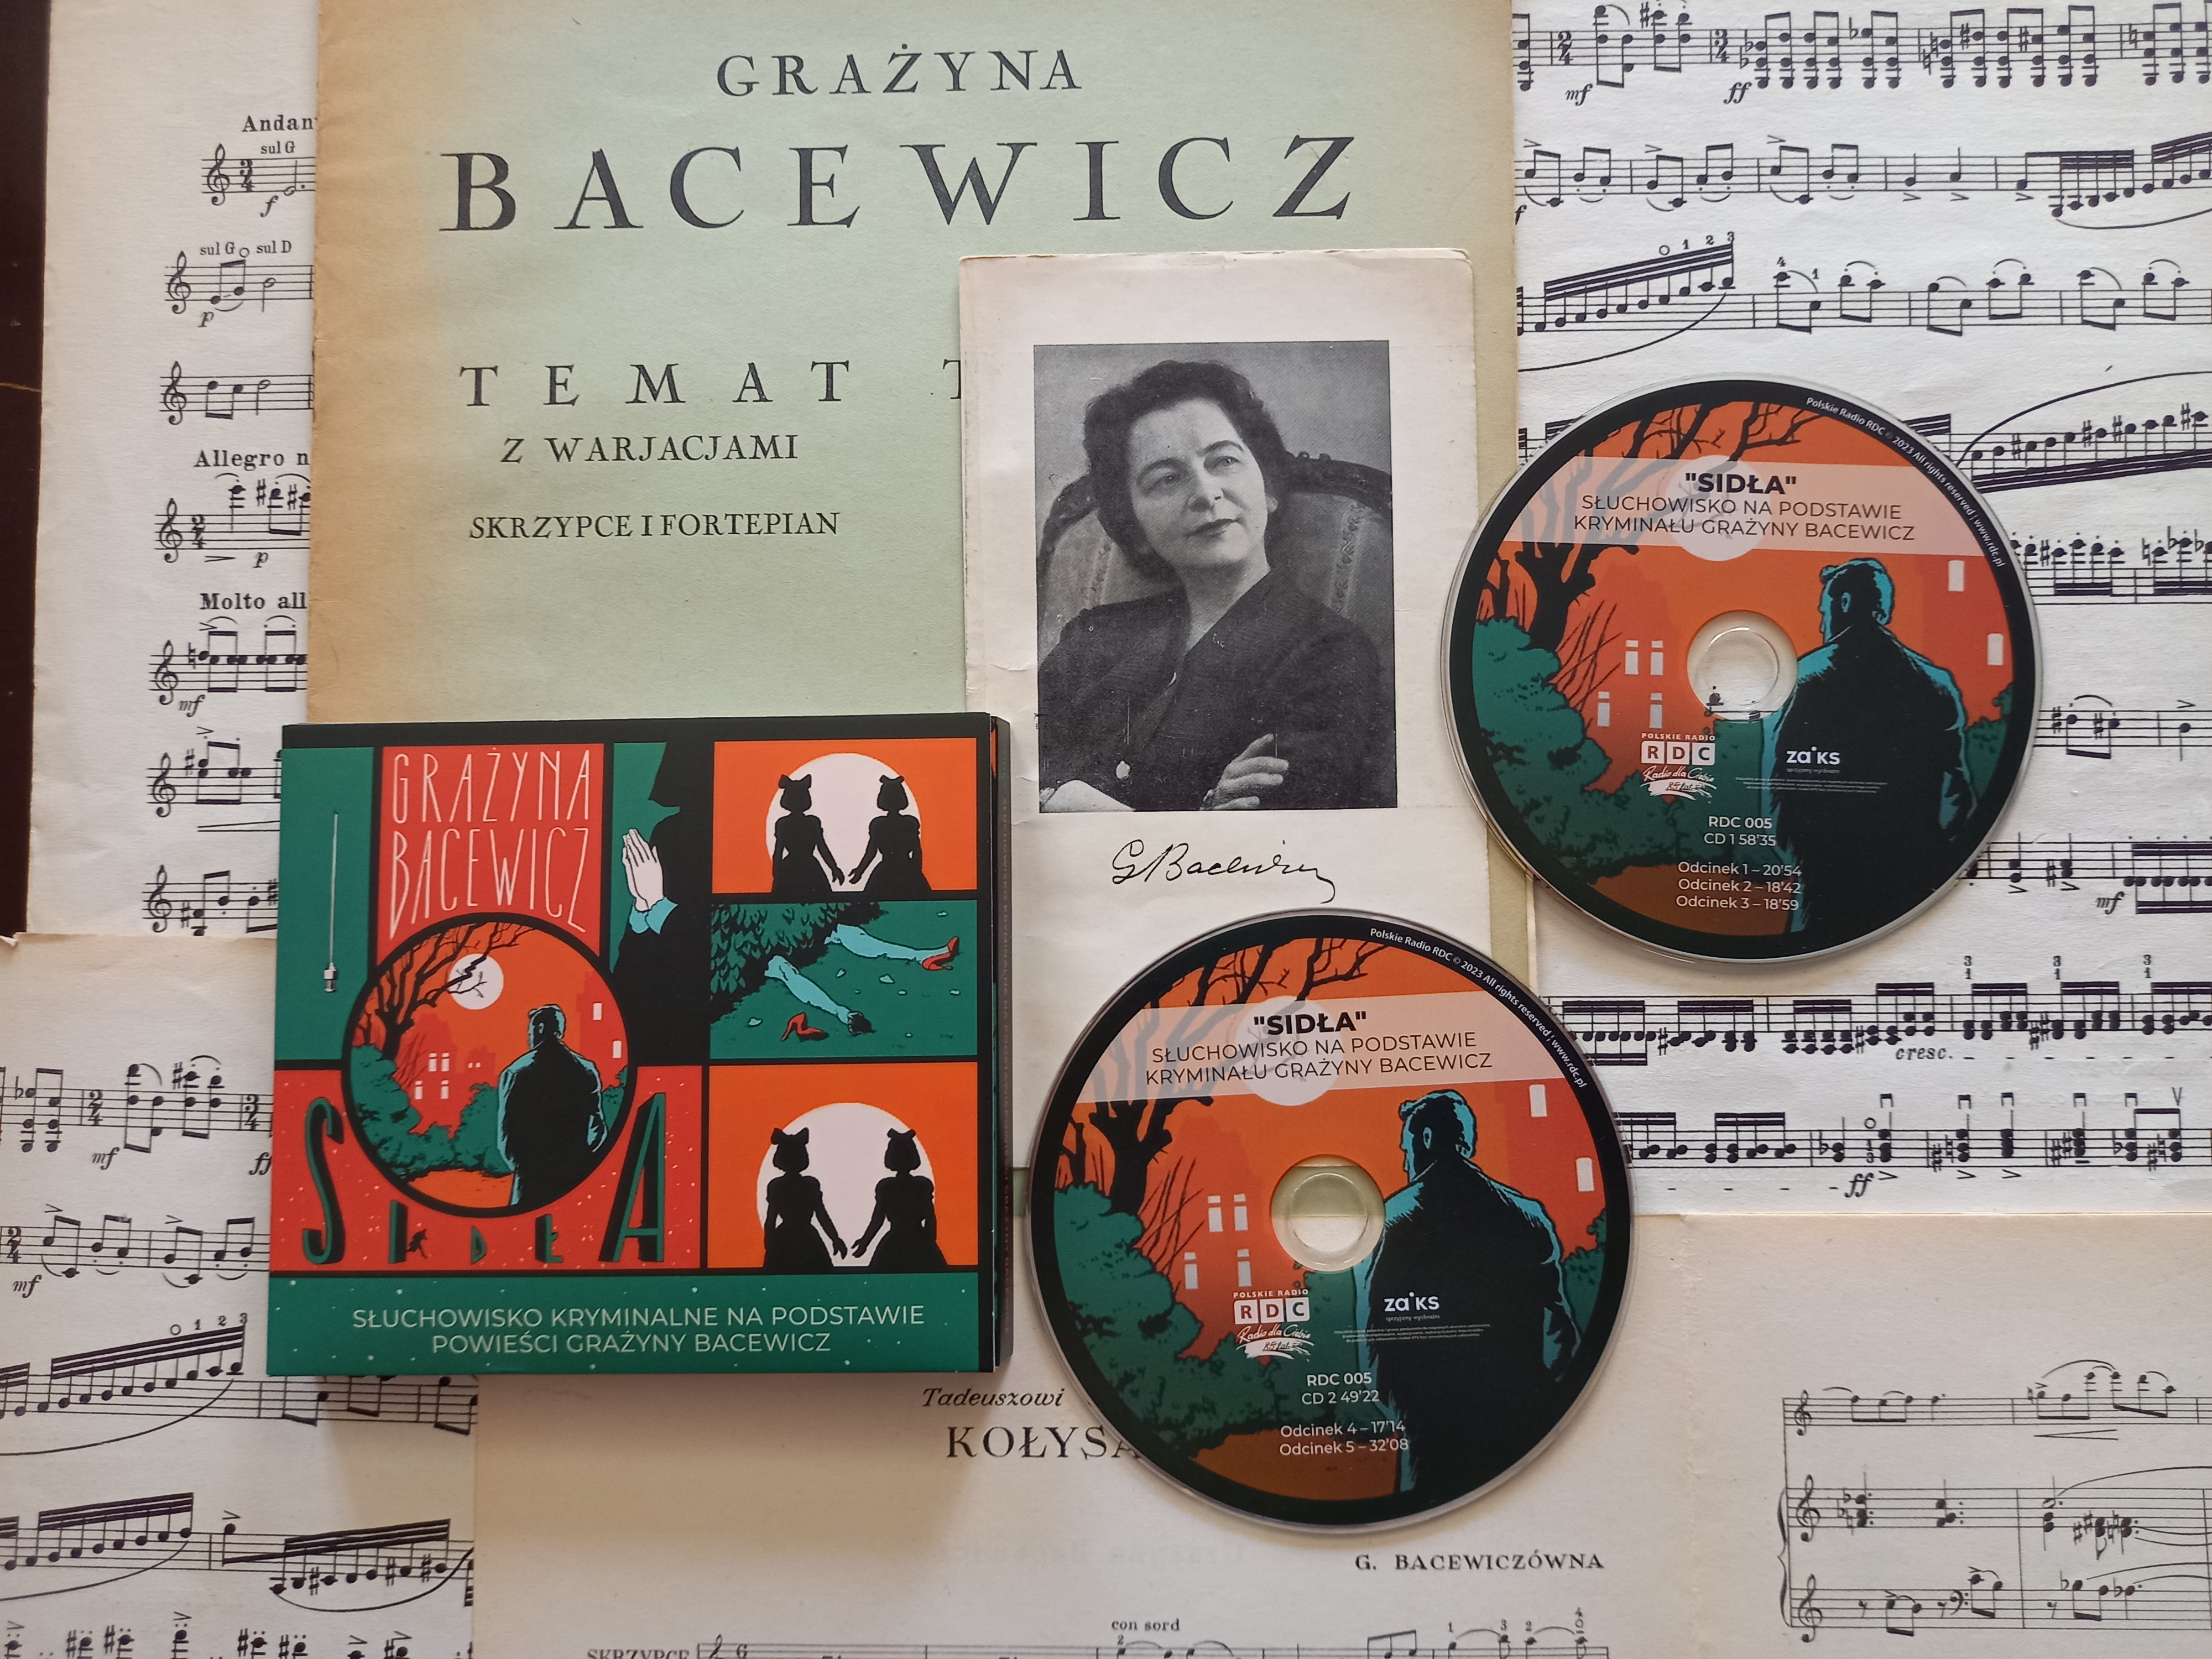 Sidła - a photo of the cover. In the background a score by Grażyna Bacewicz